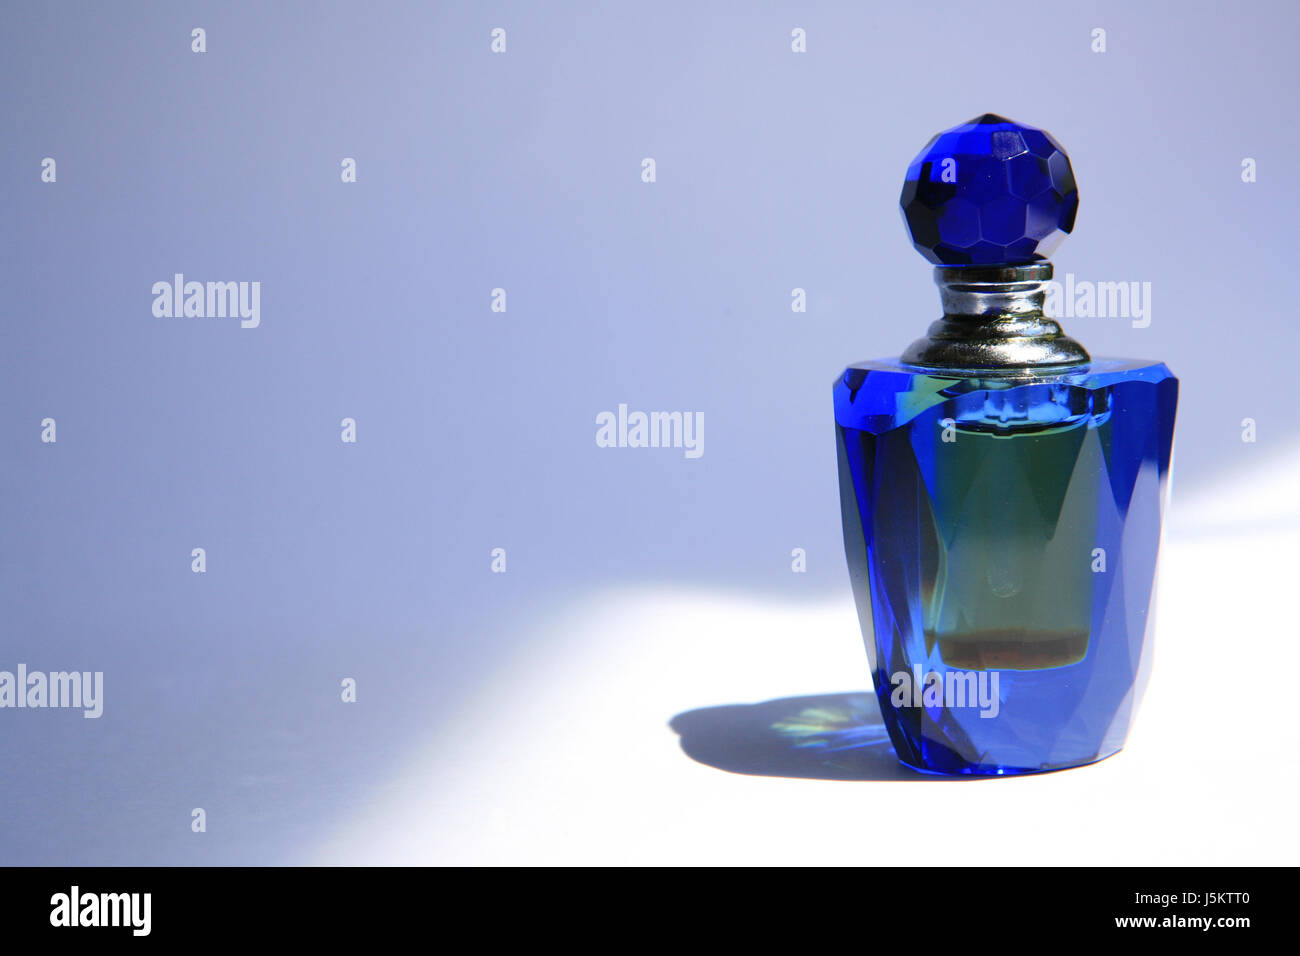 bottle perfume details container materials smashing consumer goods luxories Stock Photo